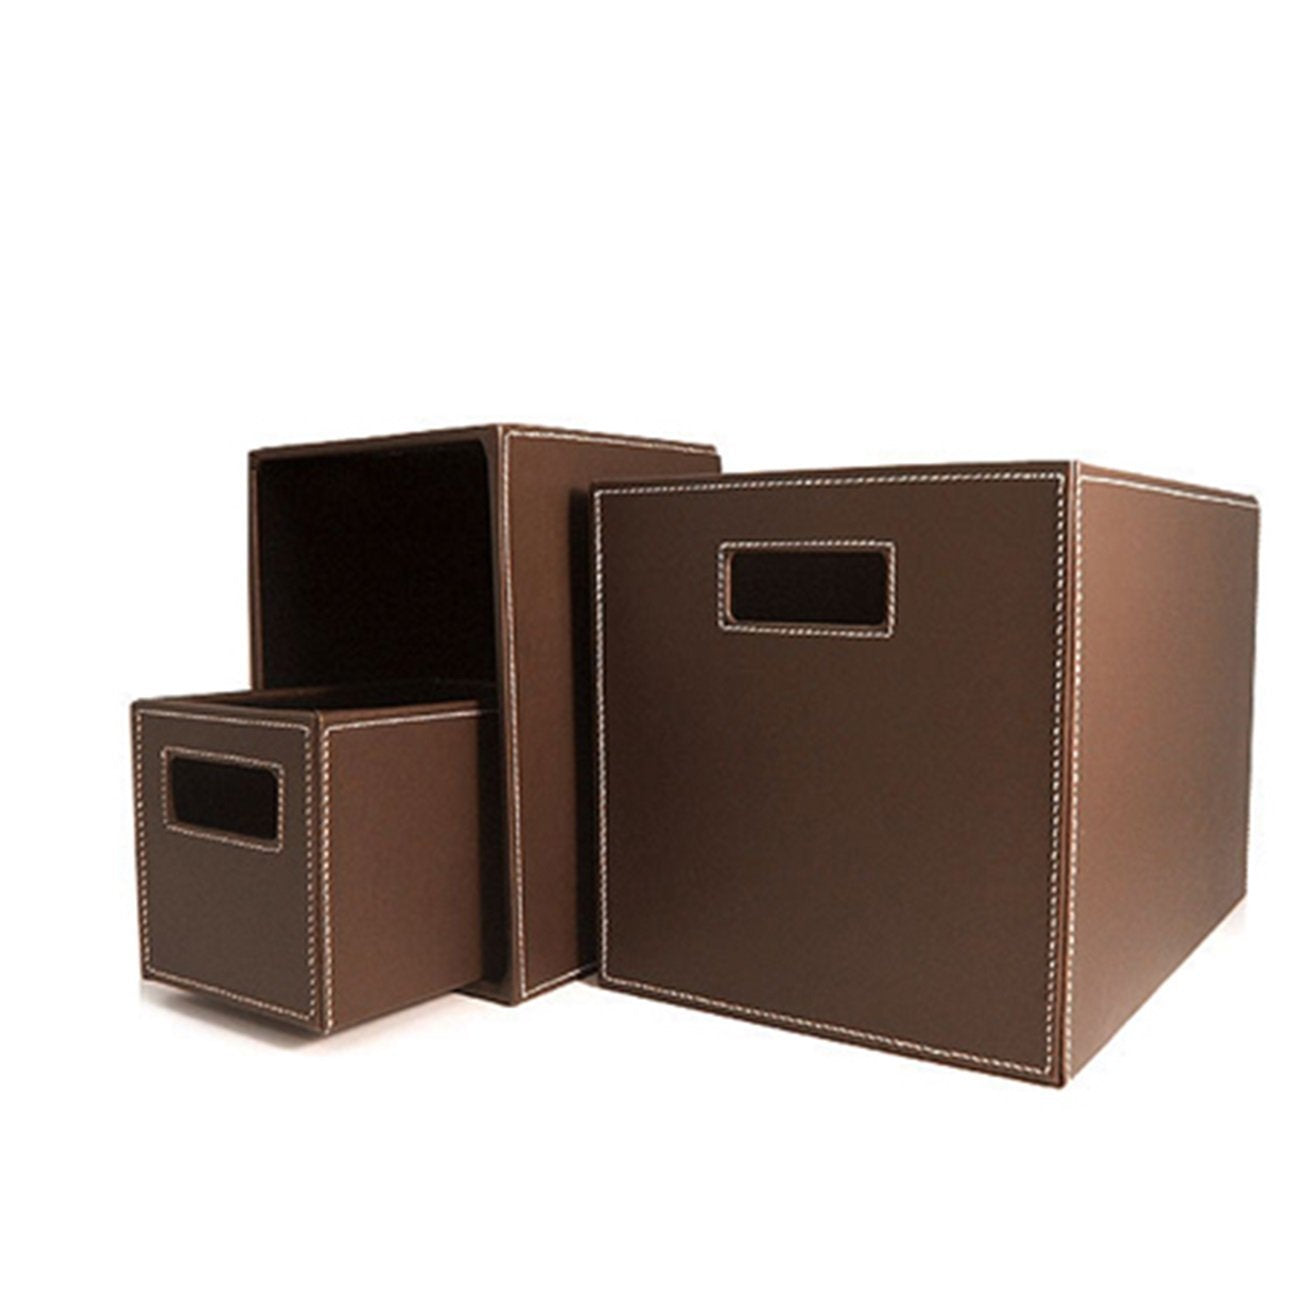 London Leather Storage Totes (Set of 3)